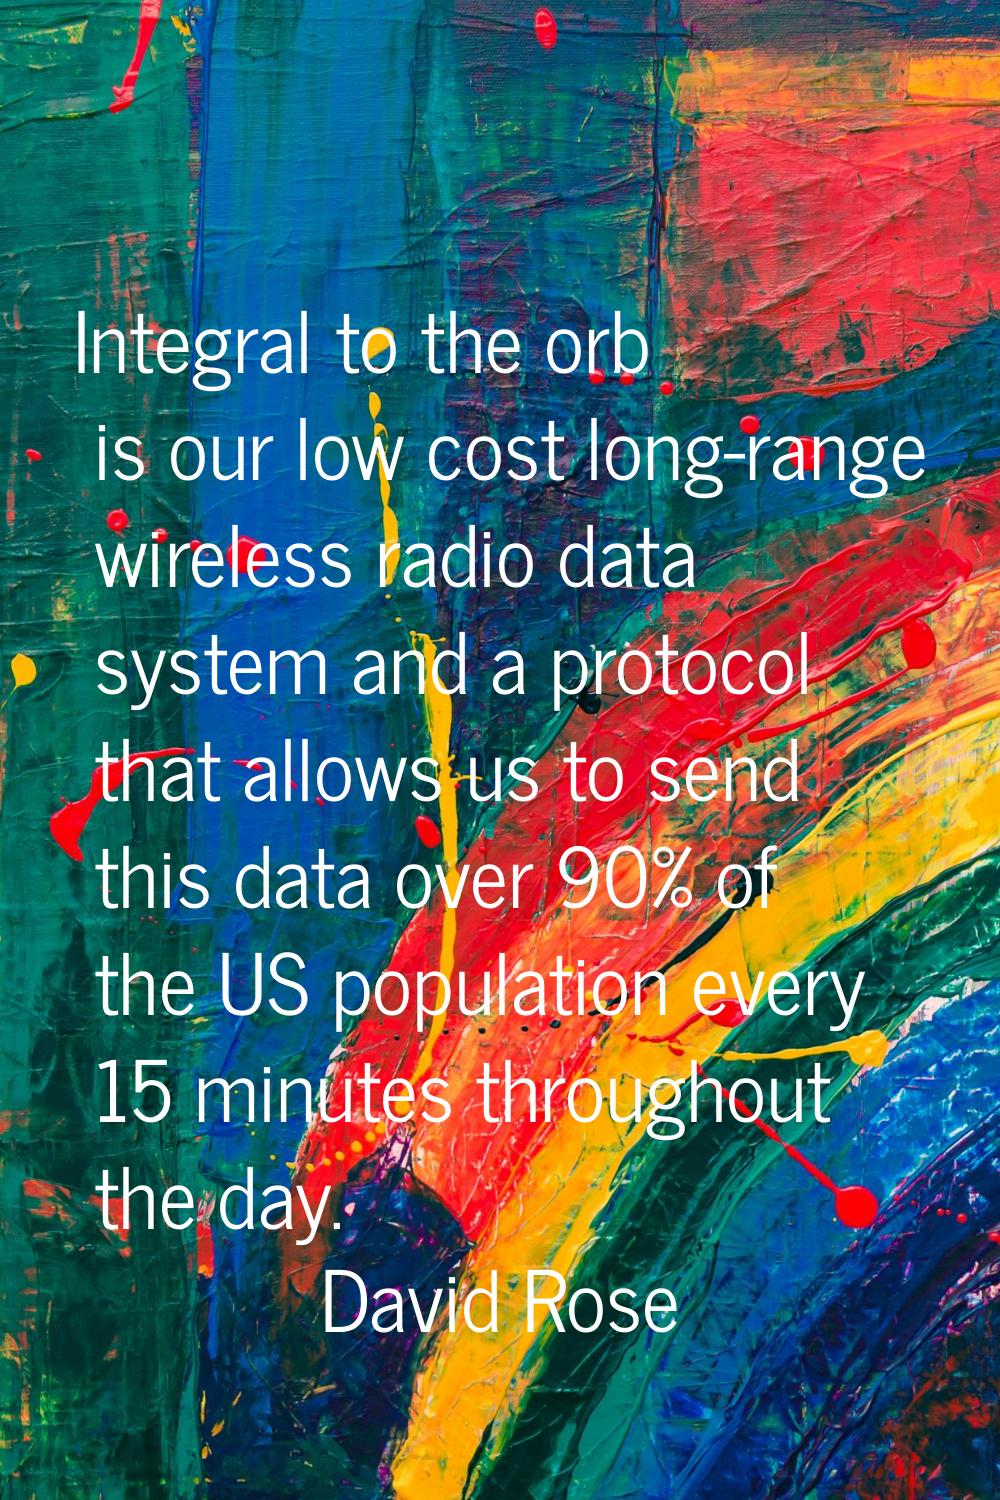 Integral to the orb is our low cost long-range wireless radio data system and a protocol that allow